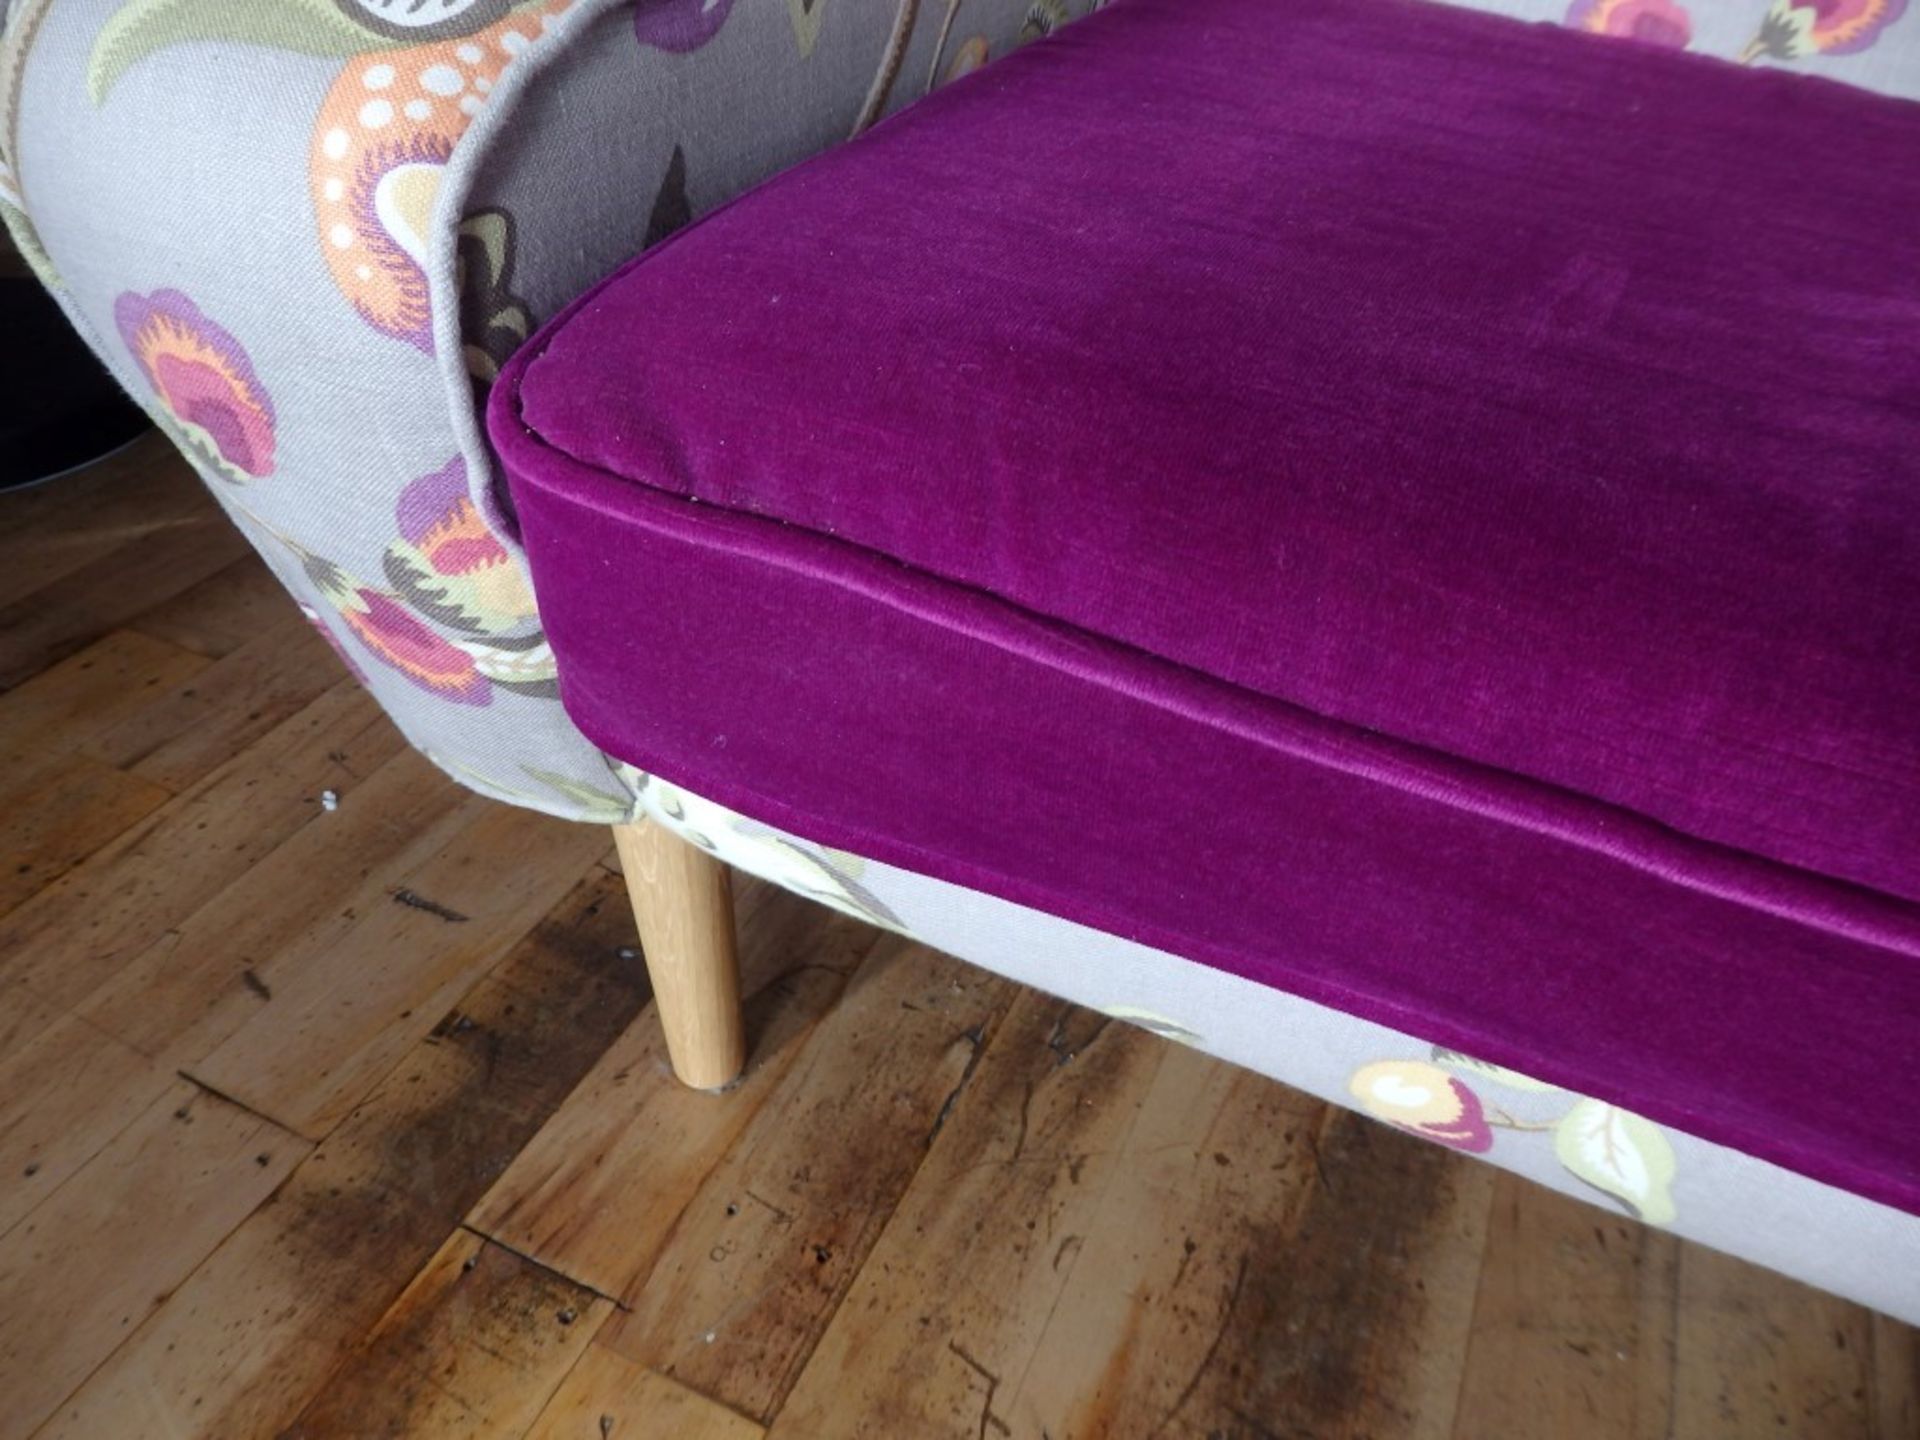 1 x Bespoke Handcrafted Sofa - British Made - Dimensions: L195 x H80 x D80cm - Ref: DB024 - - Image 4 of 5